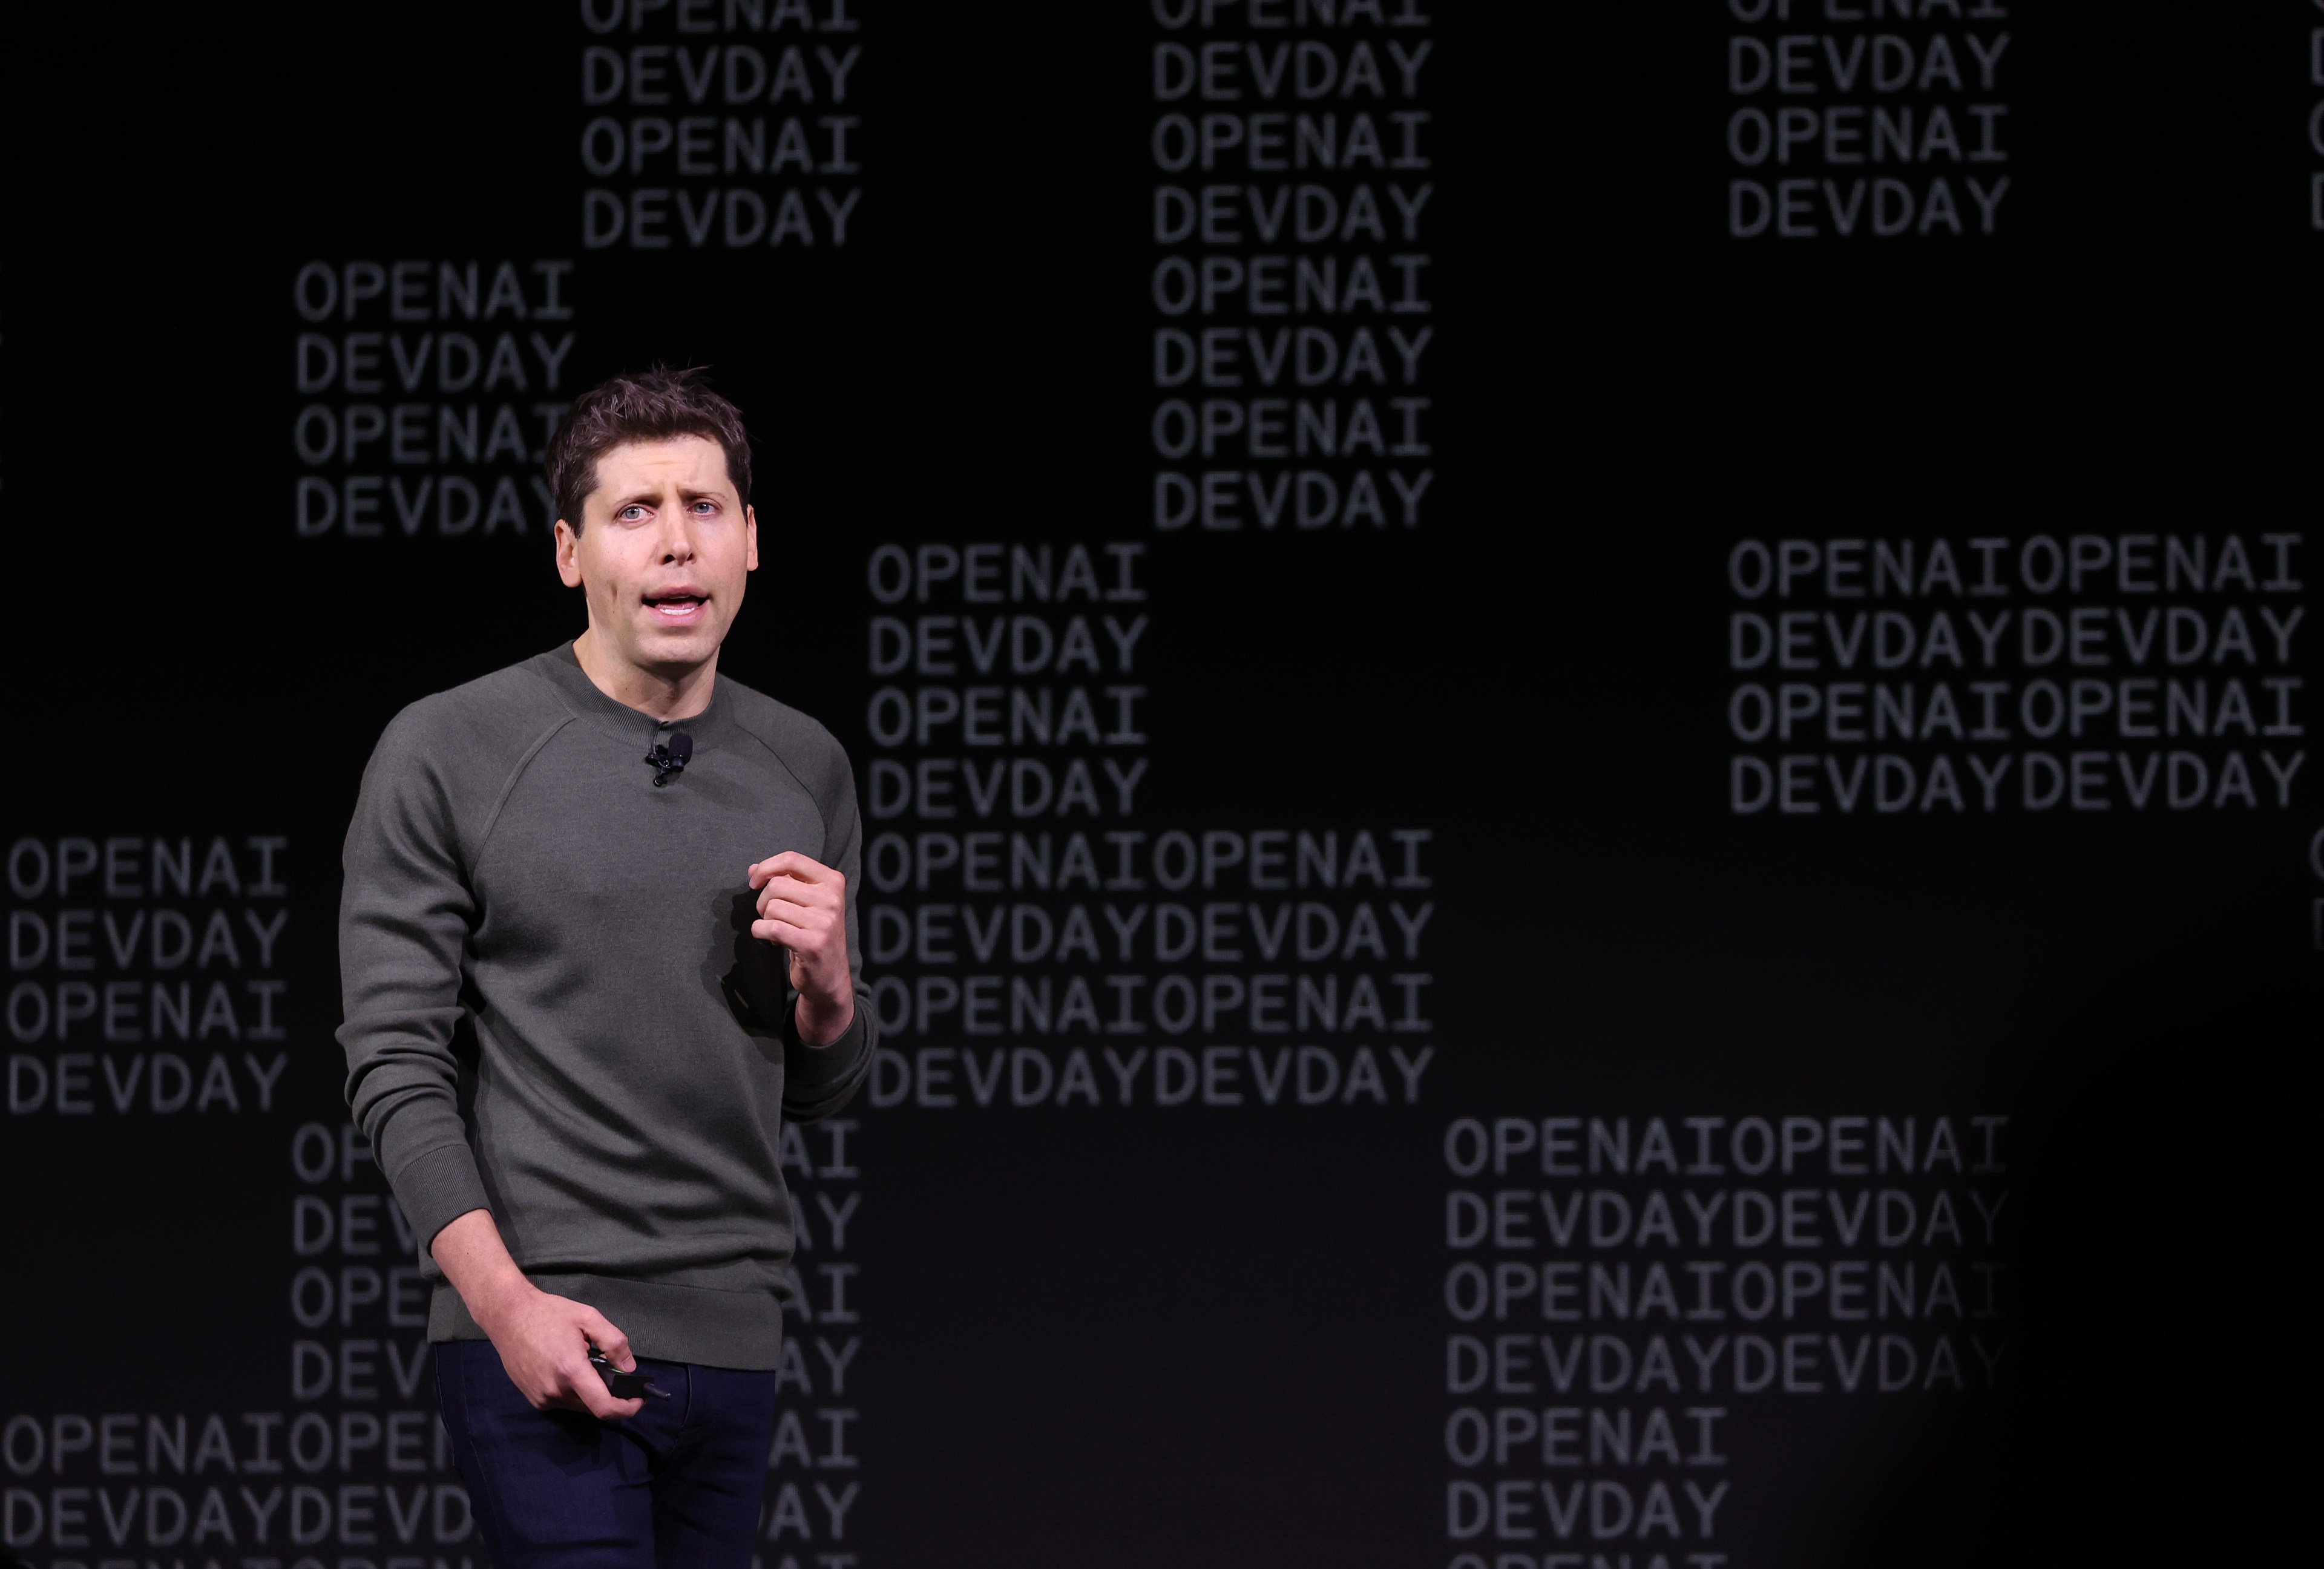 OpenAI CEO Sam Altman, wearing a gray sweater, speaks at OpenAI's DevDay conference in San Francisco